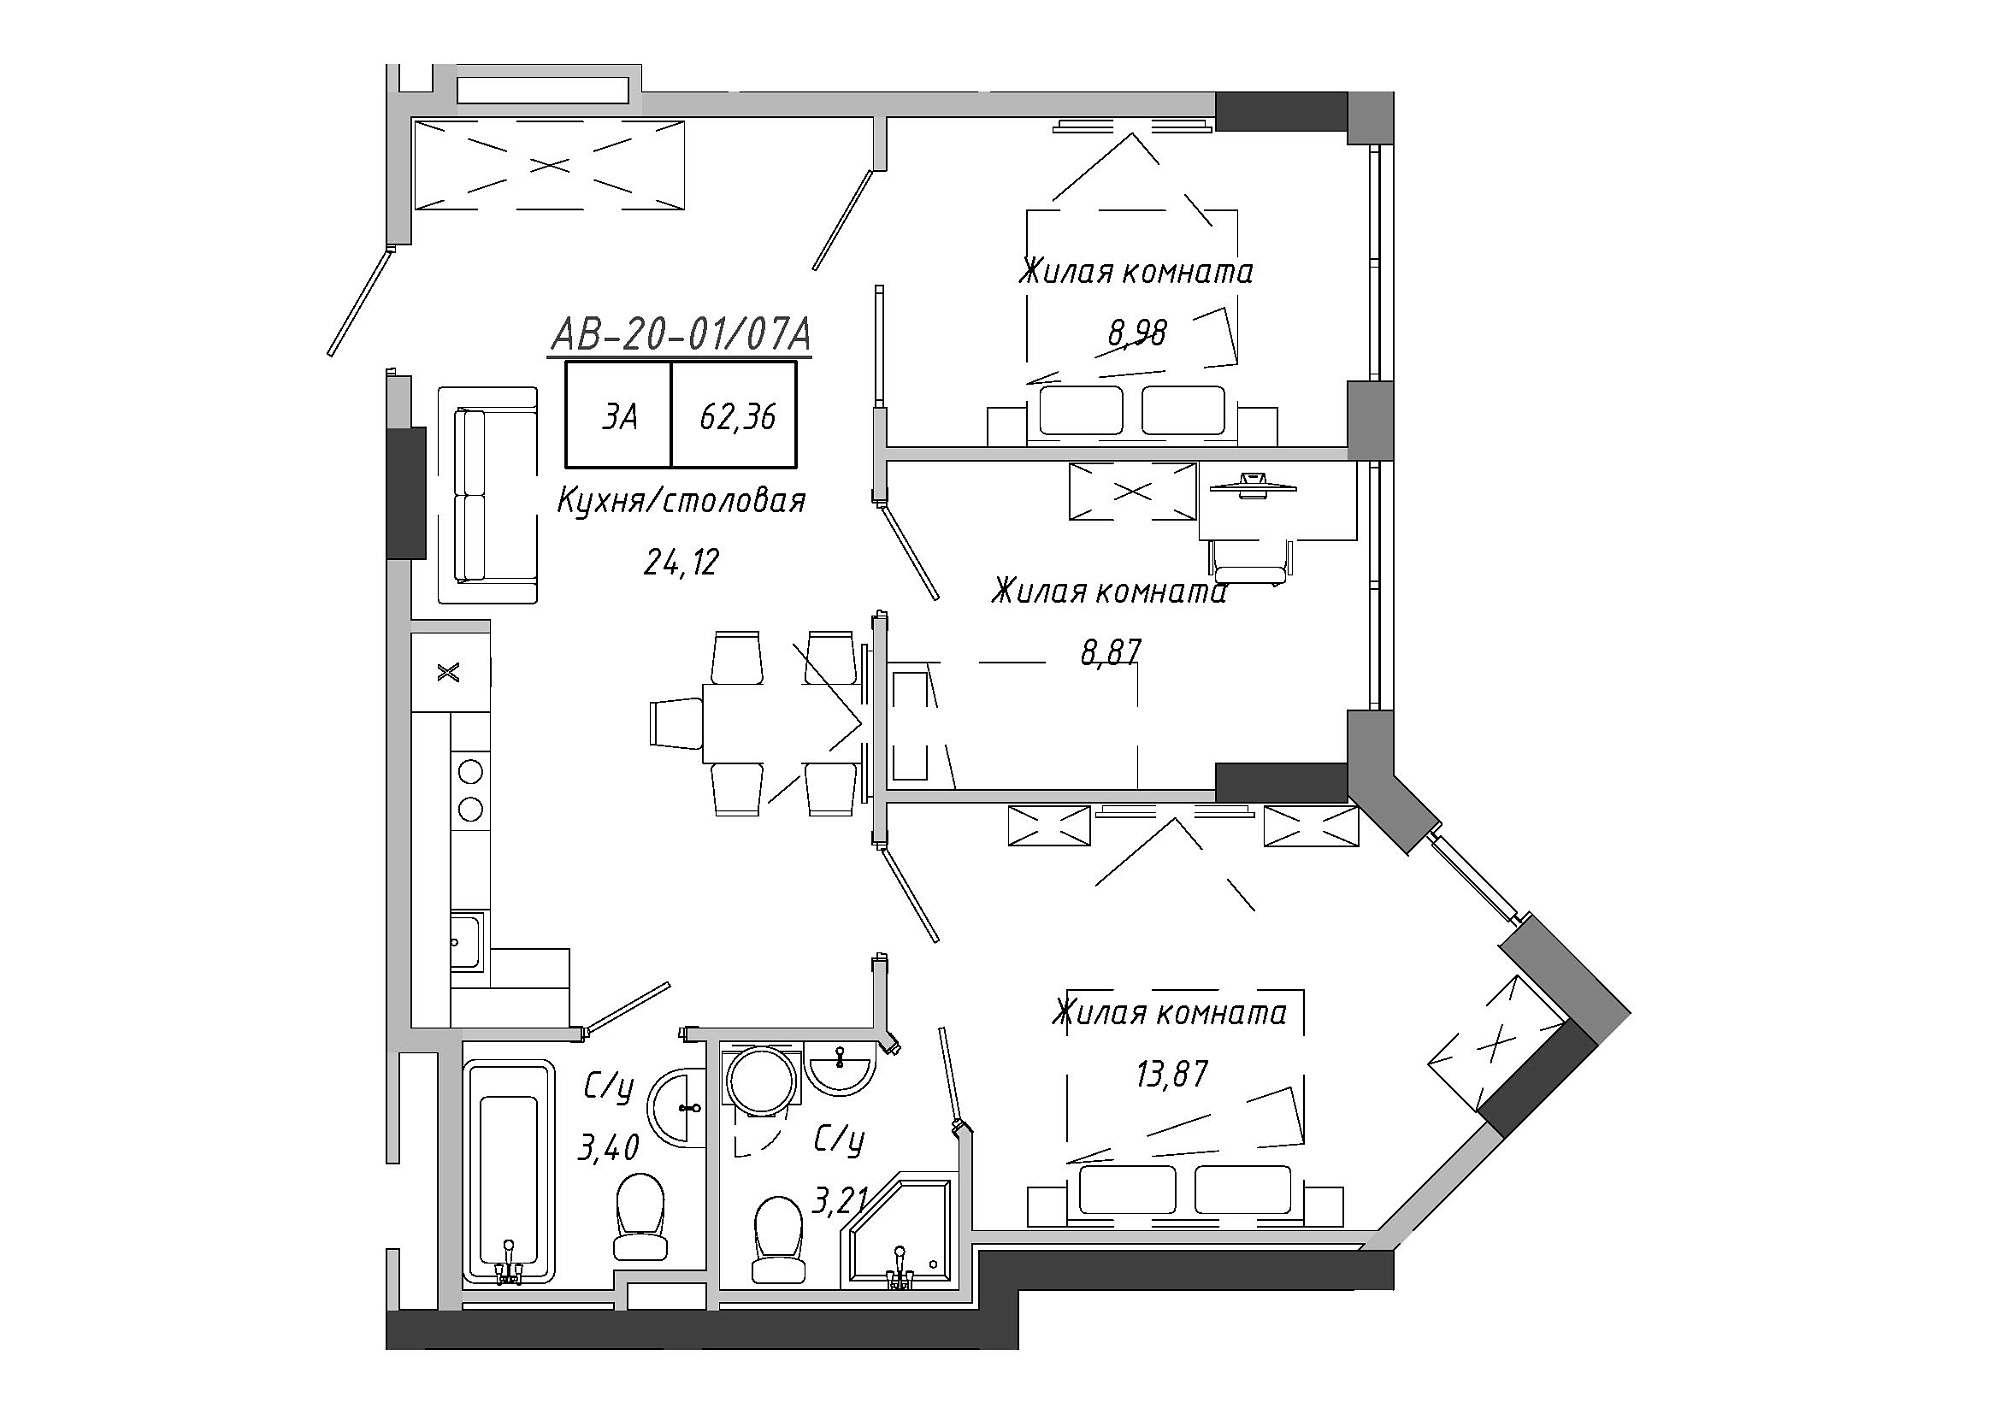 Planning 3-rm flats area 62.36m2, AB-20-01/0007а.